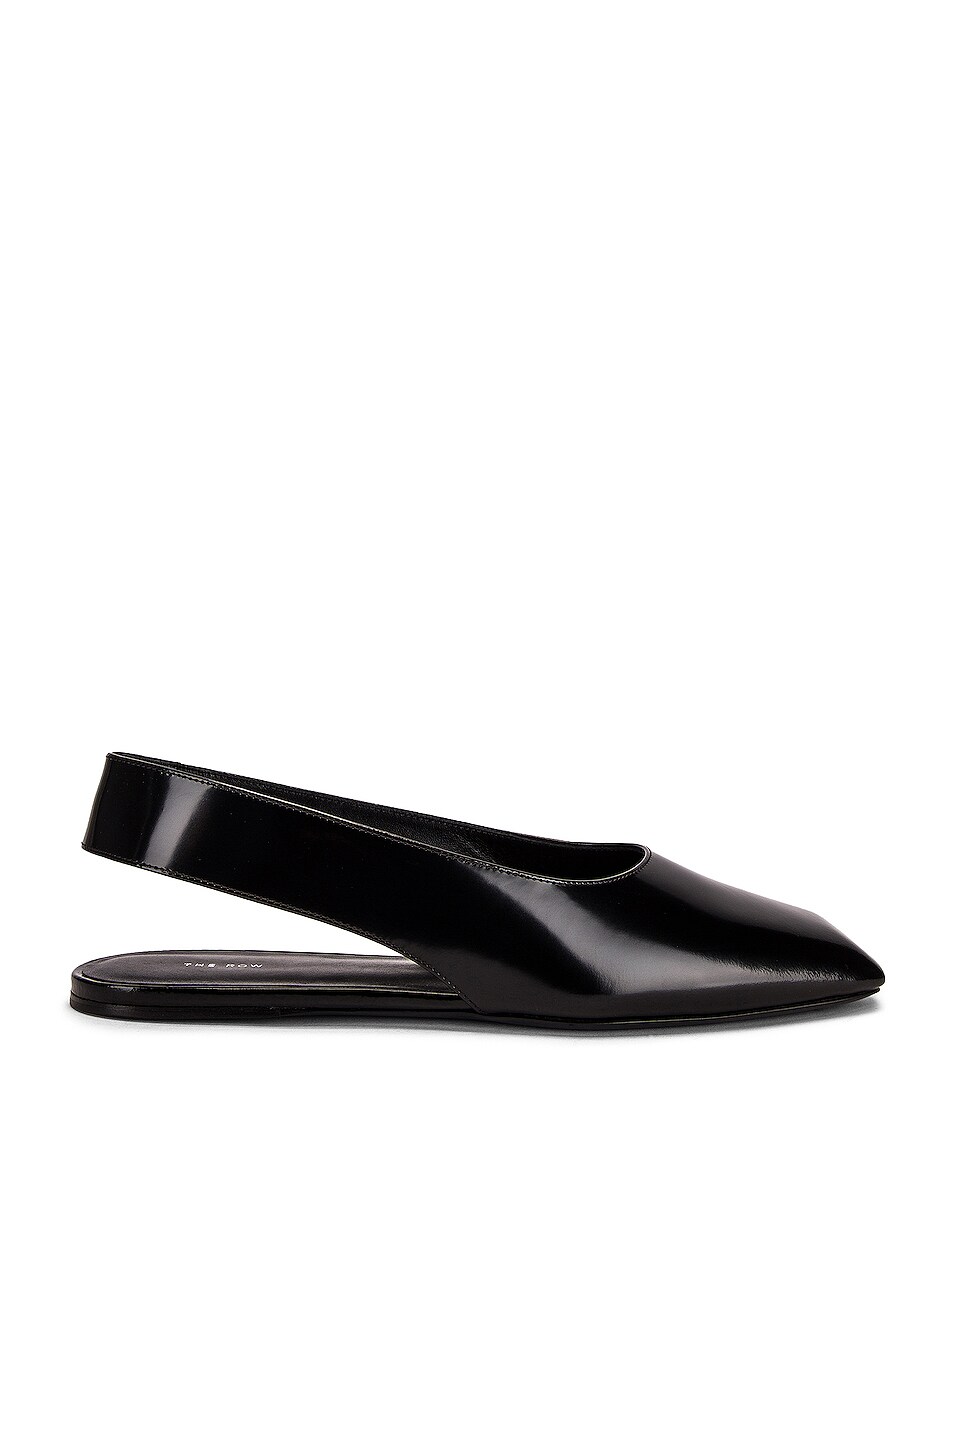 Image 1 of The Row Sharp Flat Sandals in Black